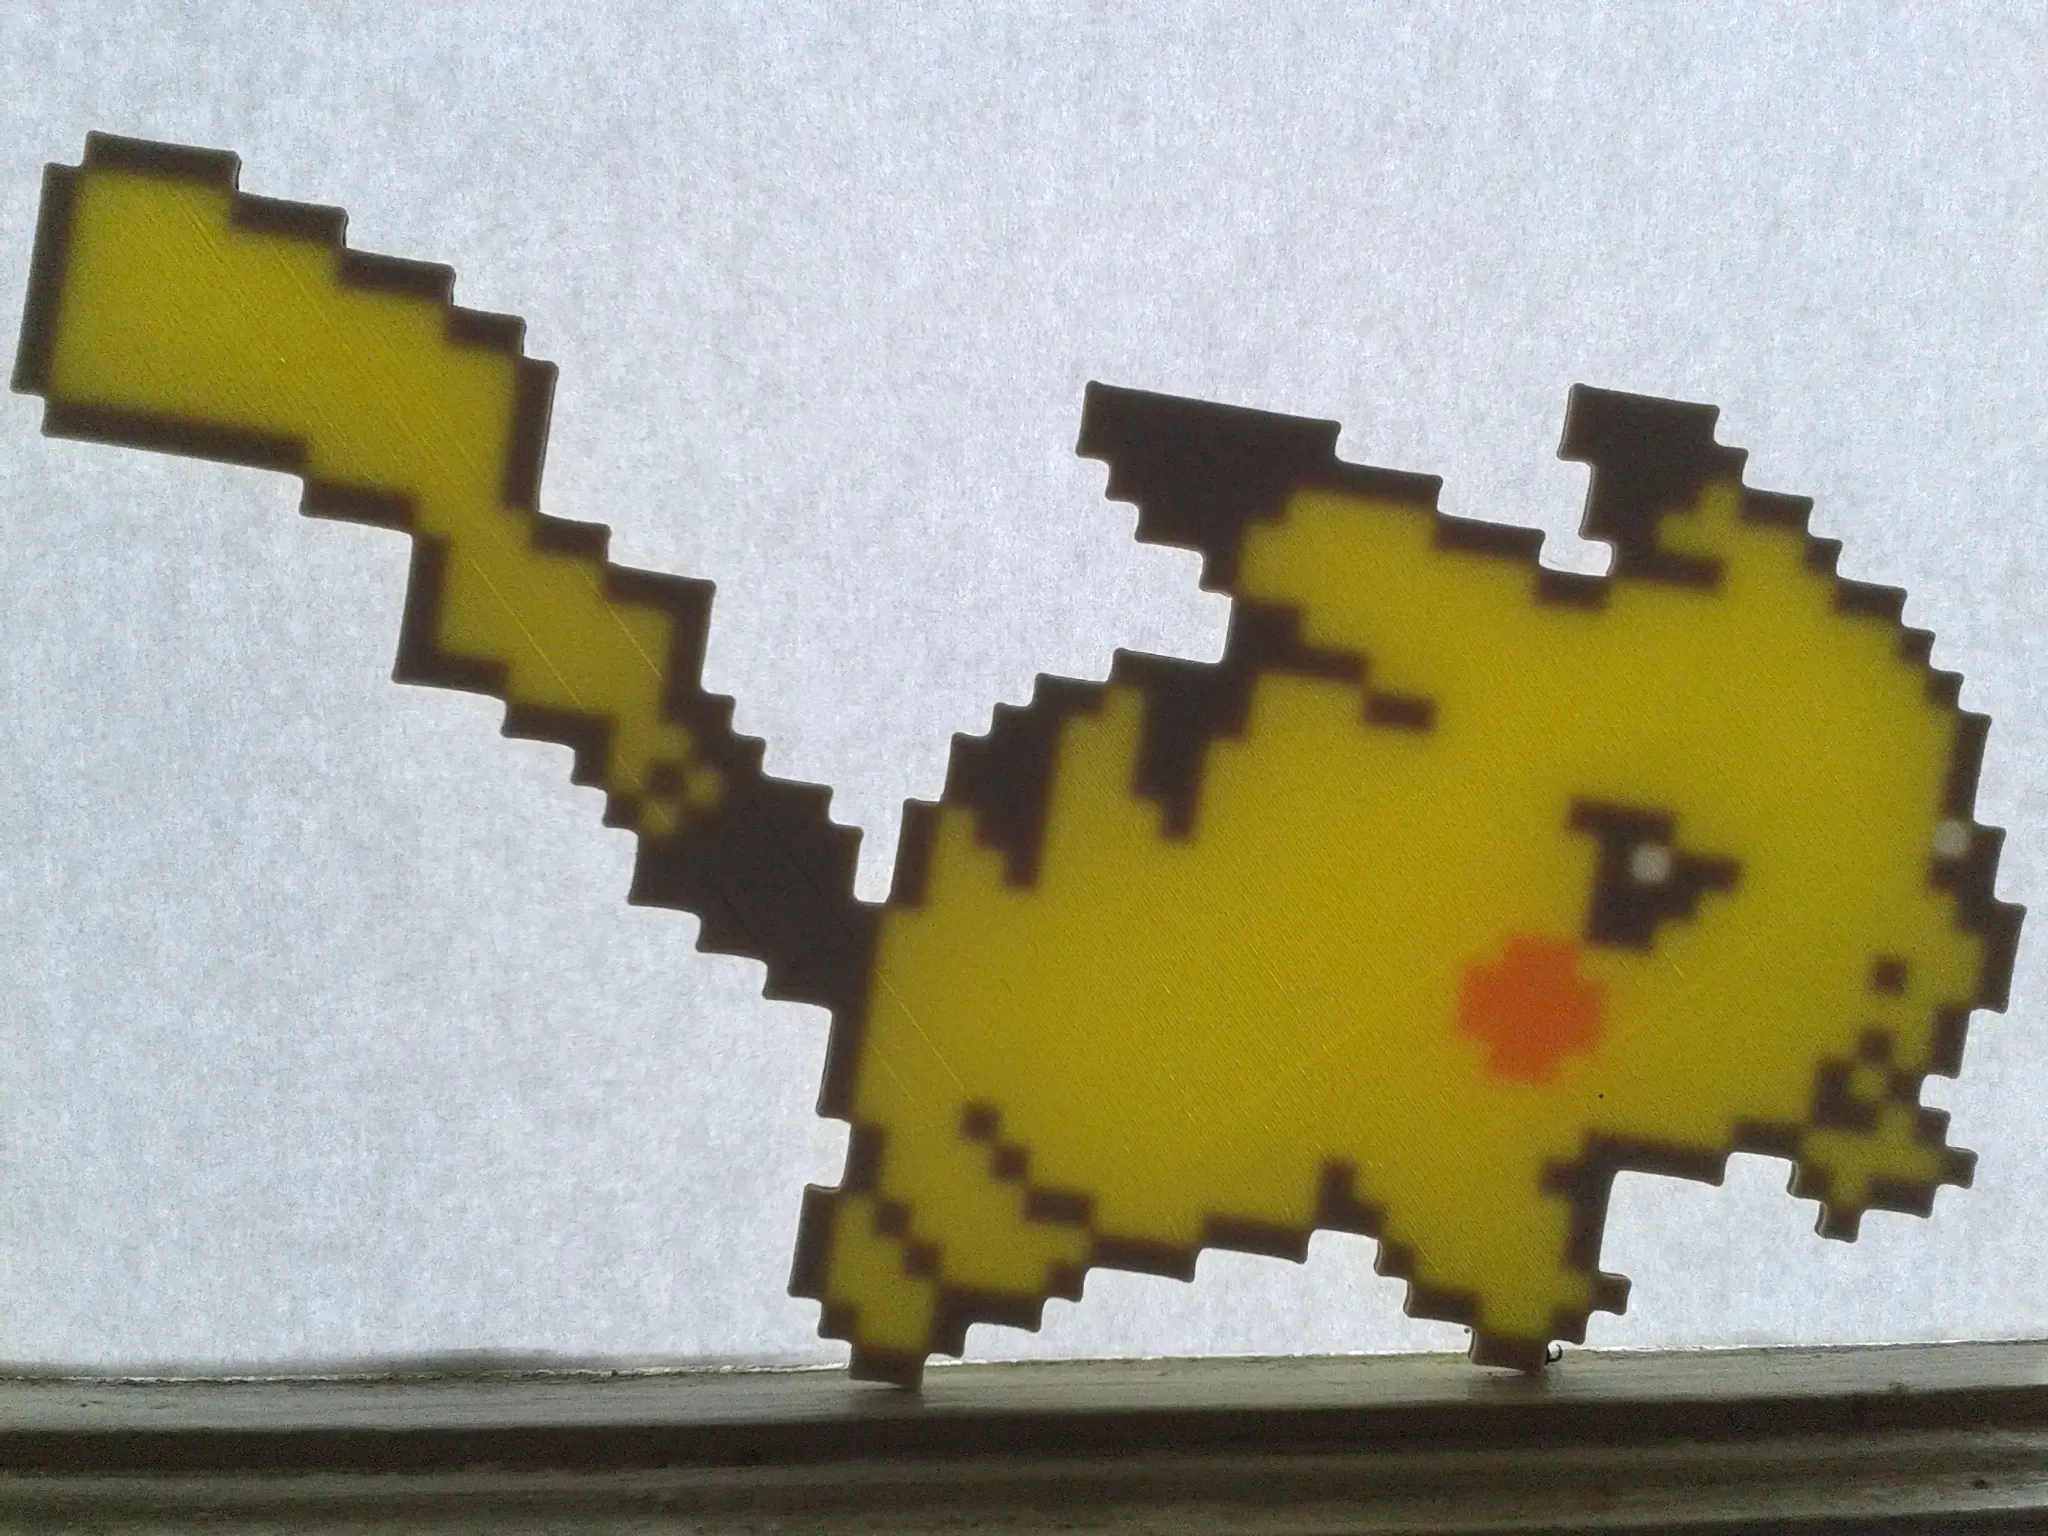 Pikachu, with 3 filament changes